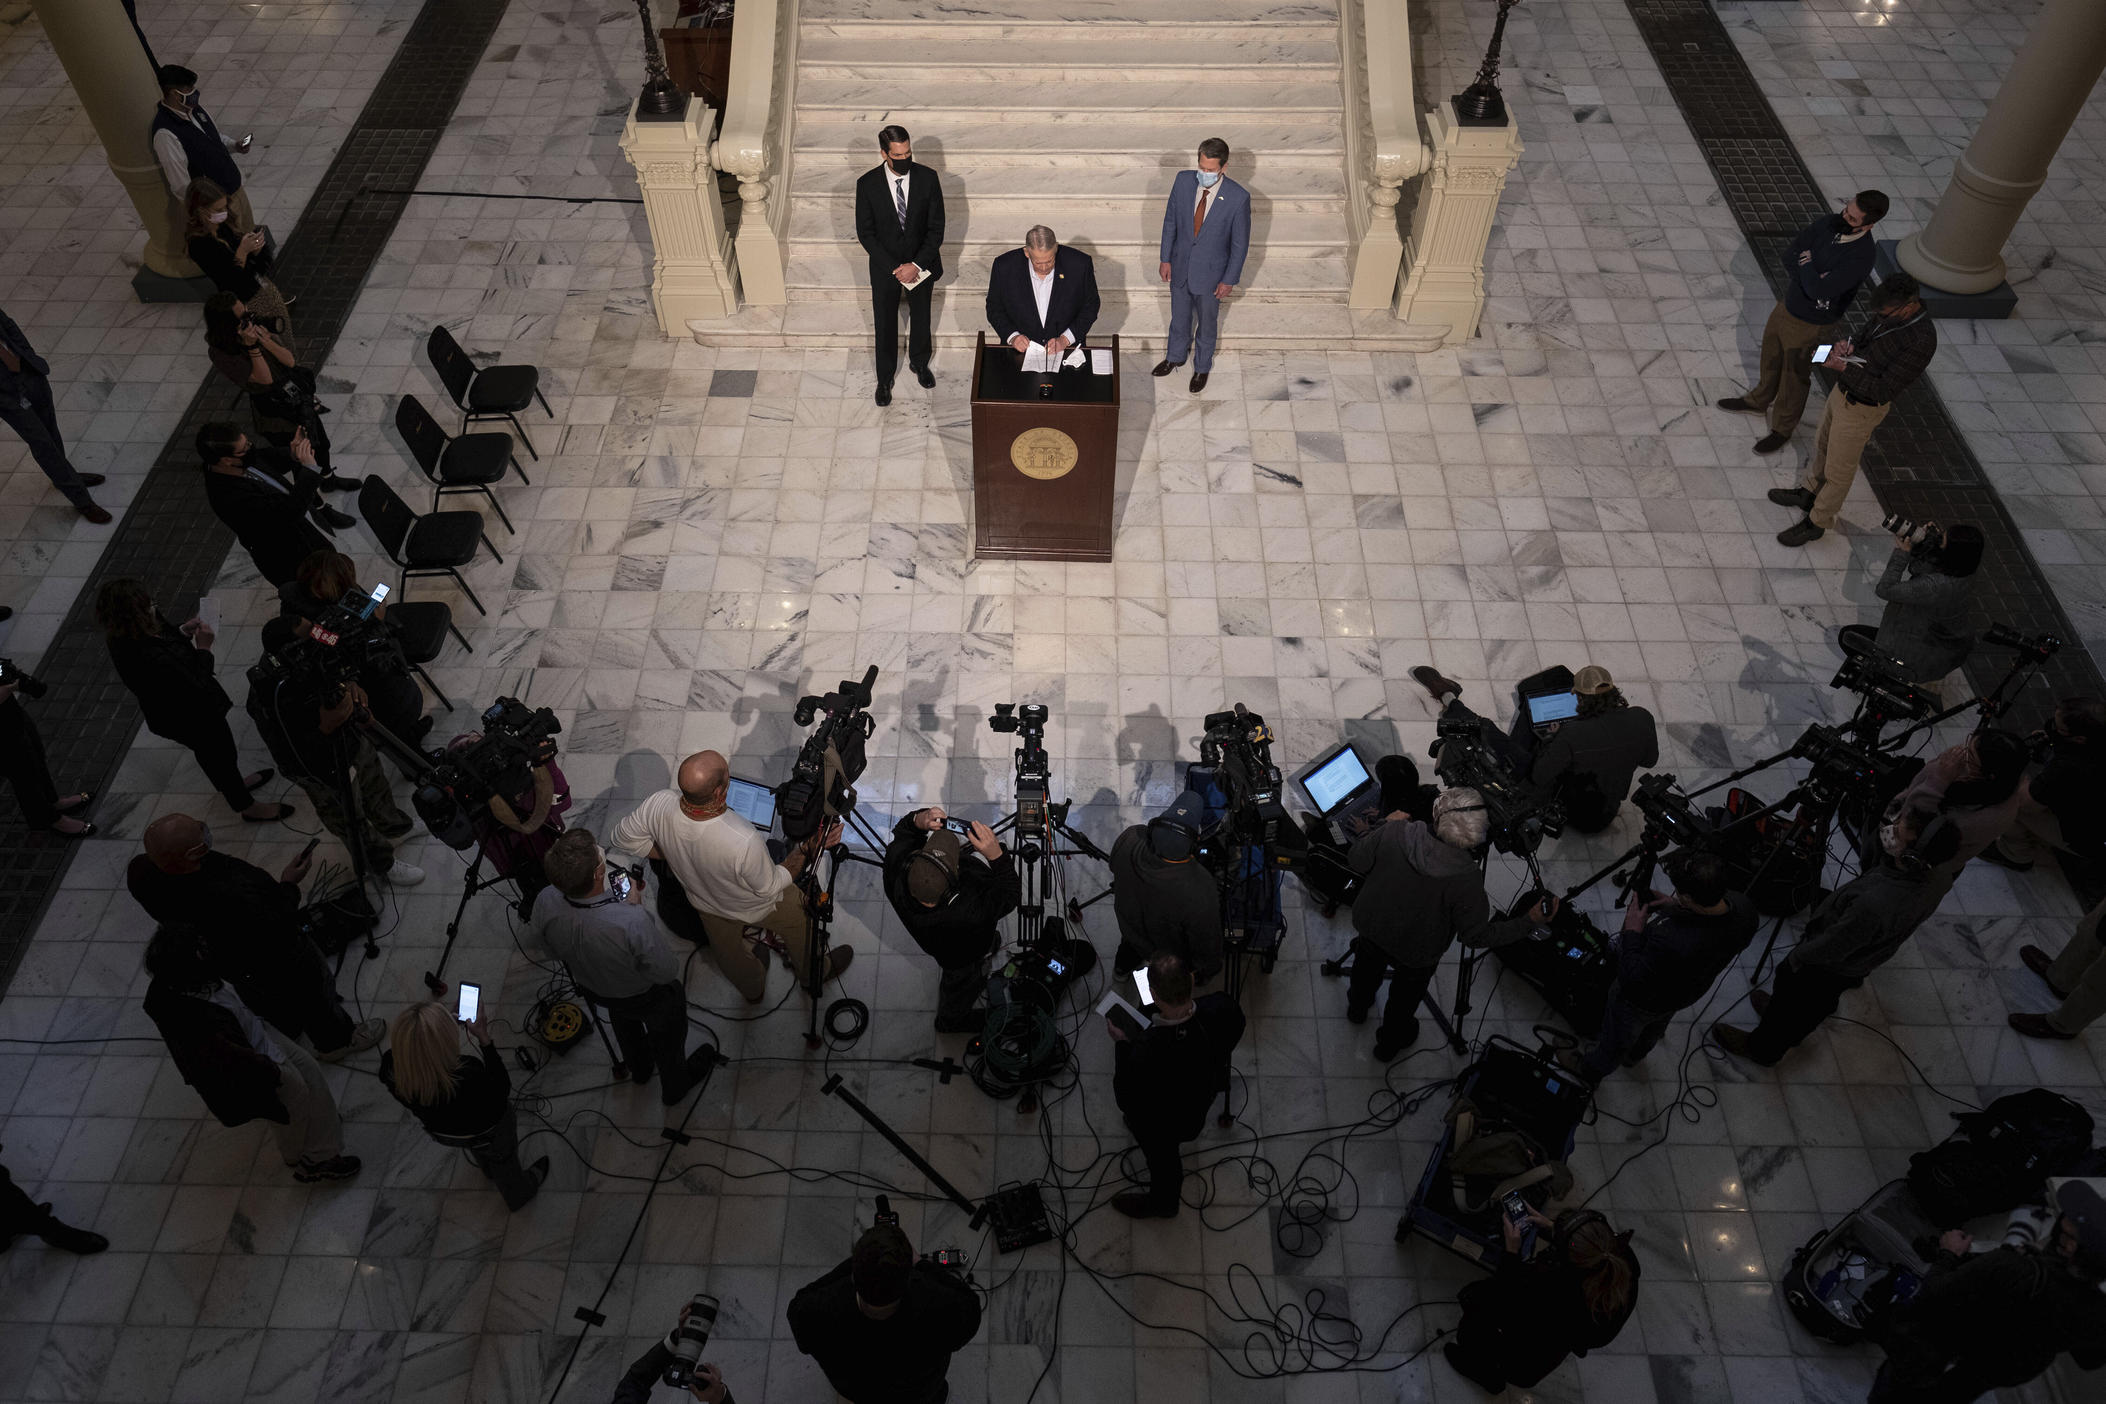 Georgia Speaker of the House David Ralston speaks to reporters with Lt. Gov. Geoff Duncan, left, and Gov. Brian Kemp, during a press conference Wednesday evening, Jan. 6, 2021, at the Georgia State Capitol in Atlanta, to condemn the breach of the U.S. Capitol. (AP Photo/Ben Gray)